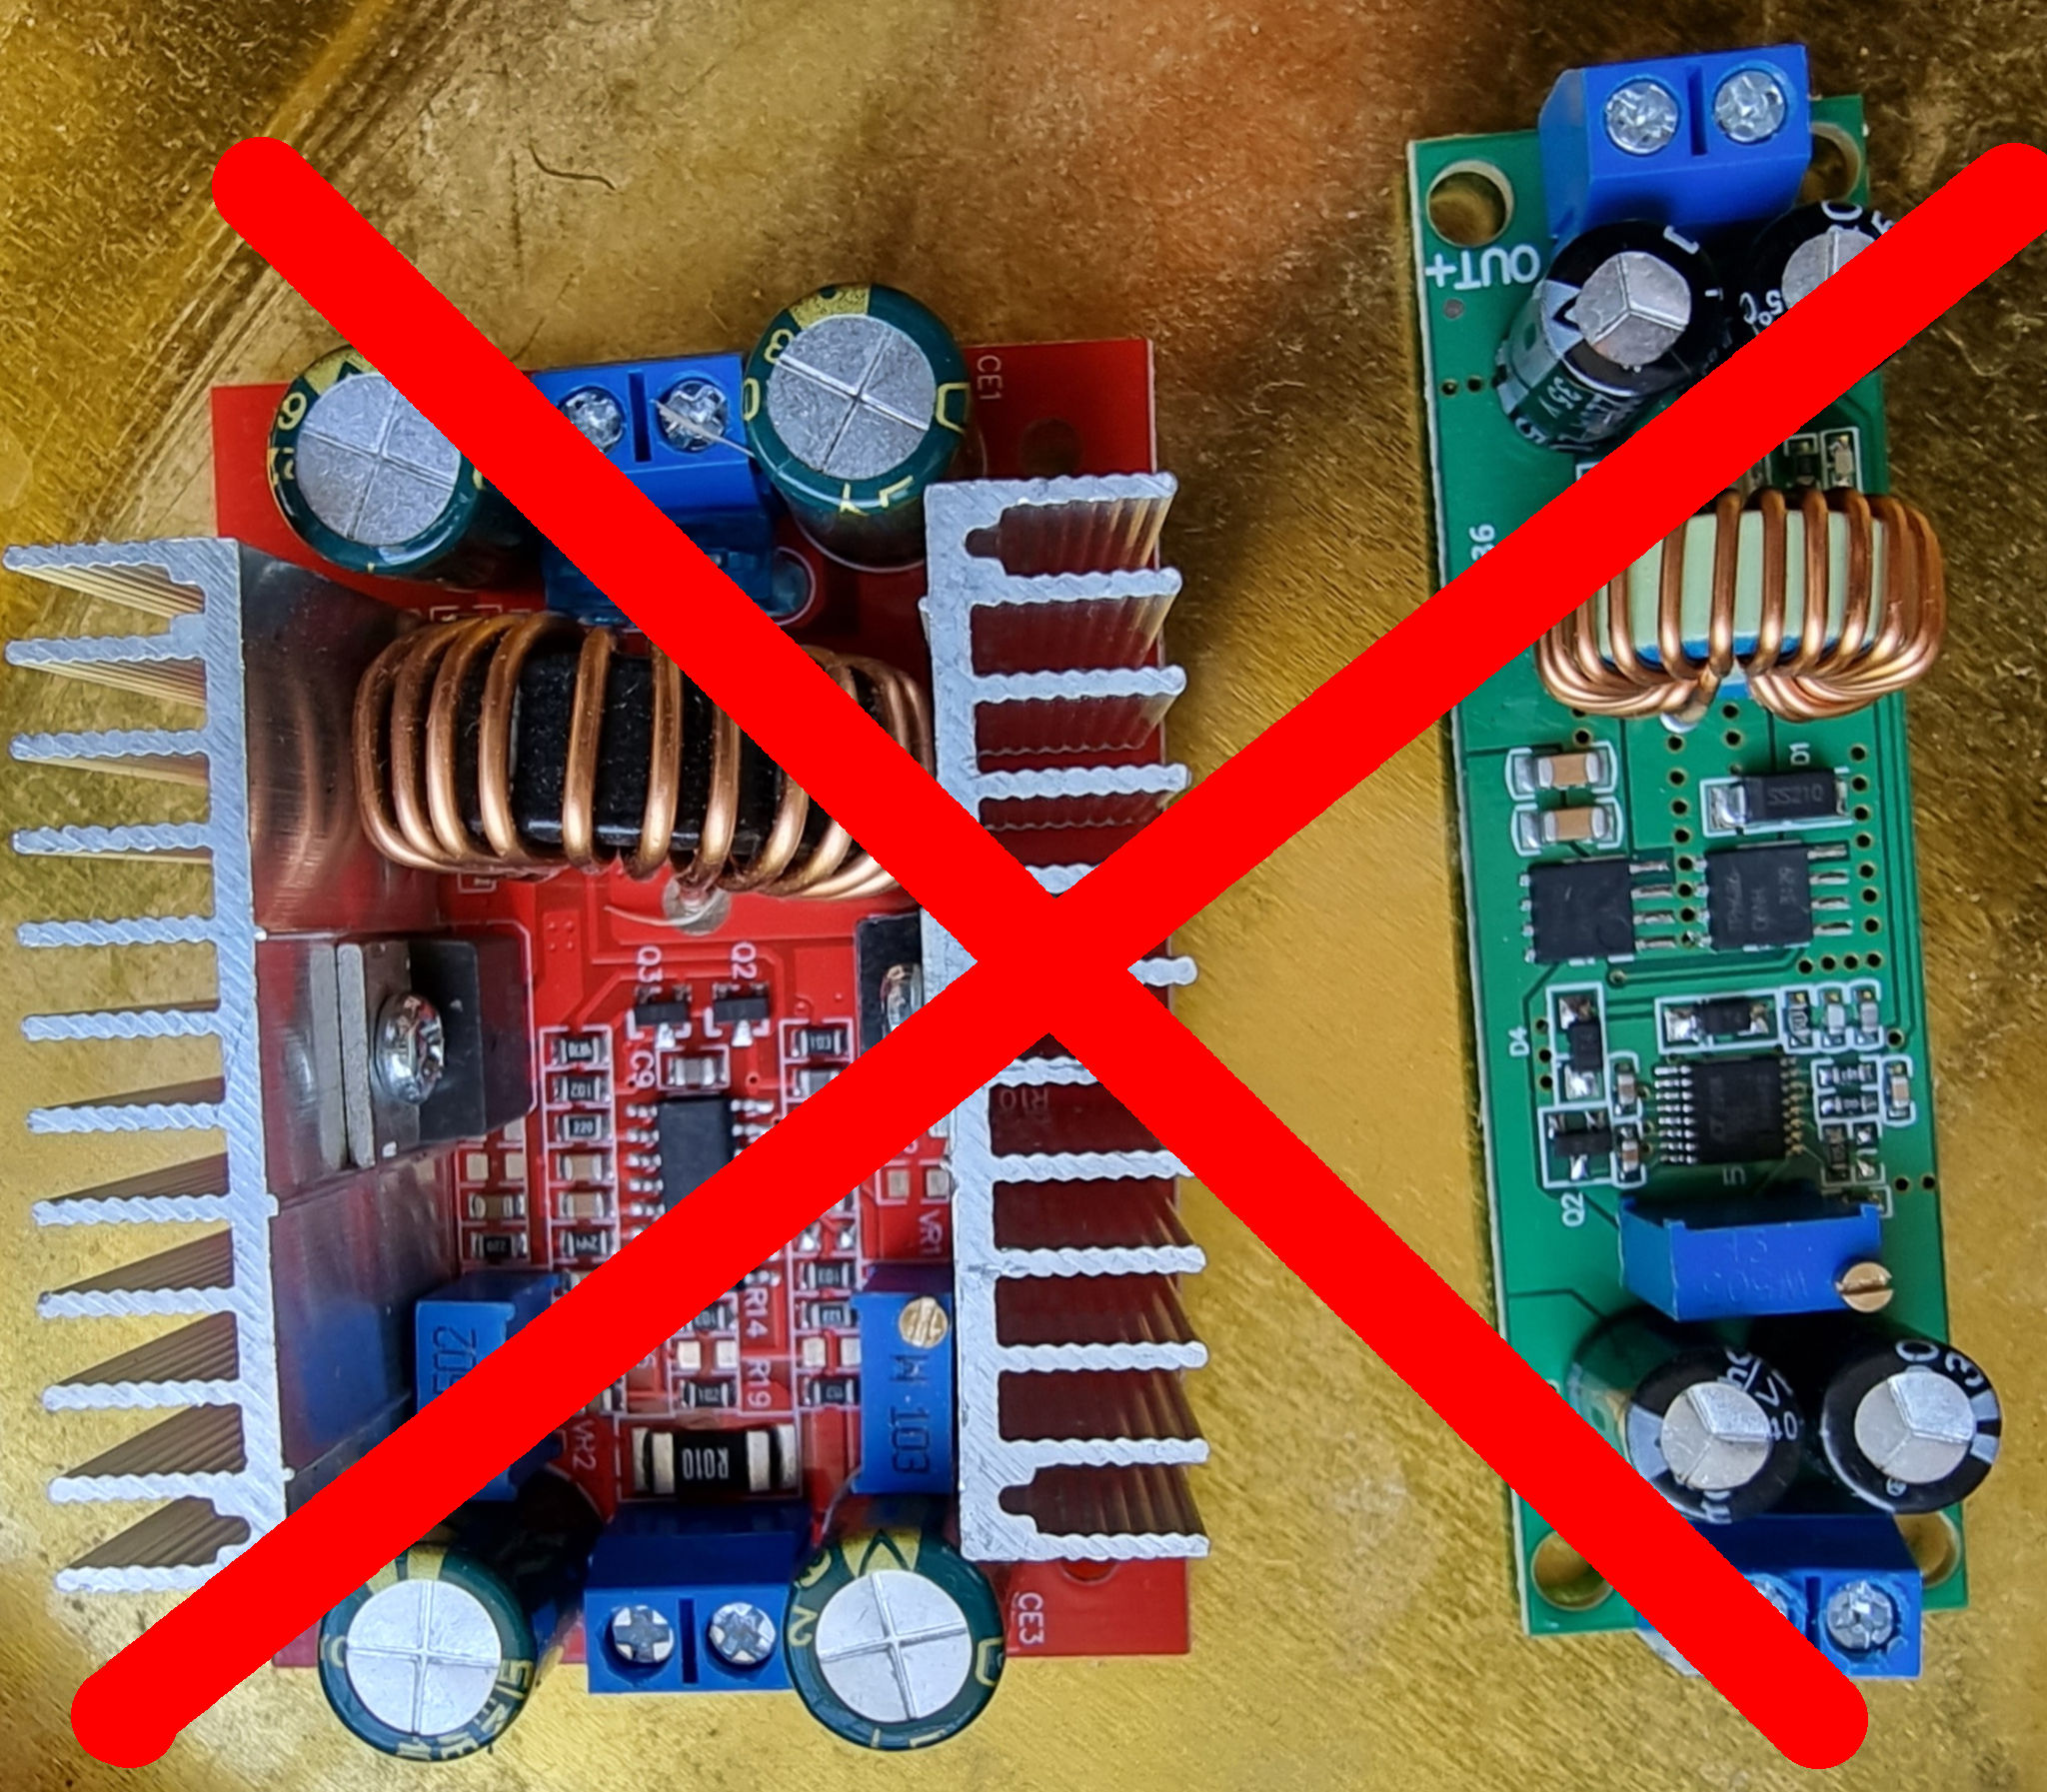 what DC-DC step down step up BUCK converter Made in China actually